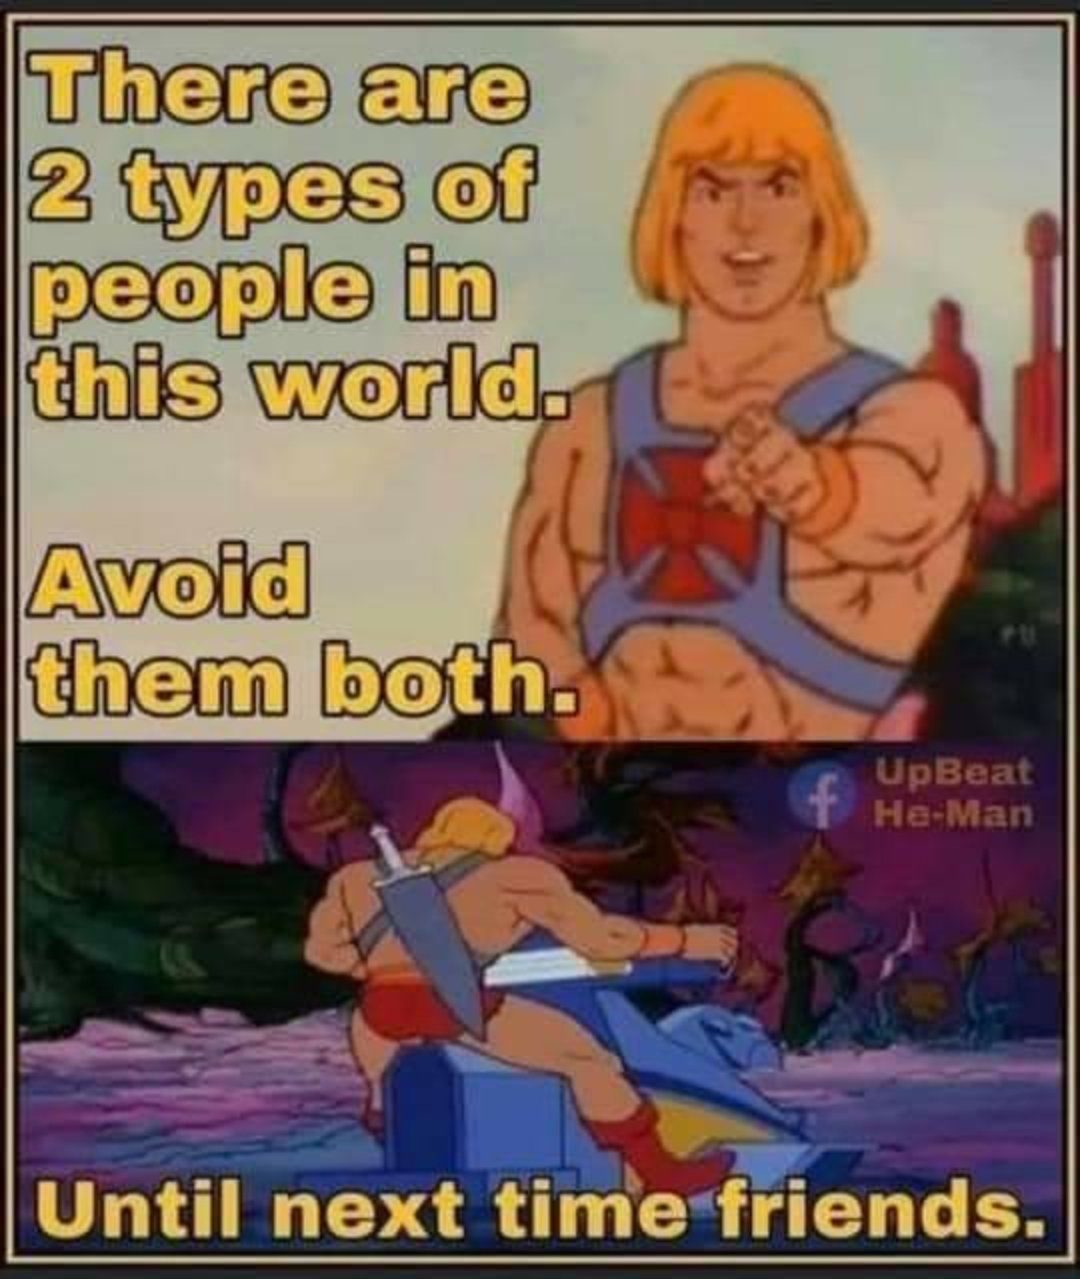 he man until next time - There are 2 types of people in this world. Avoid them both. UpBeat HeMan Until next time friends.